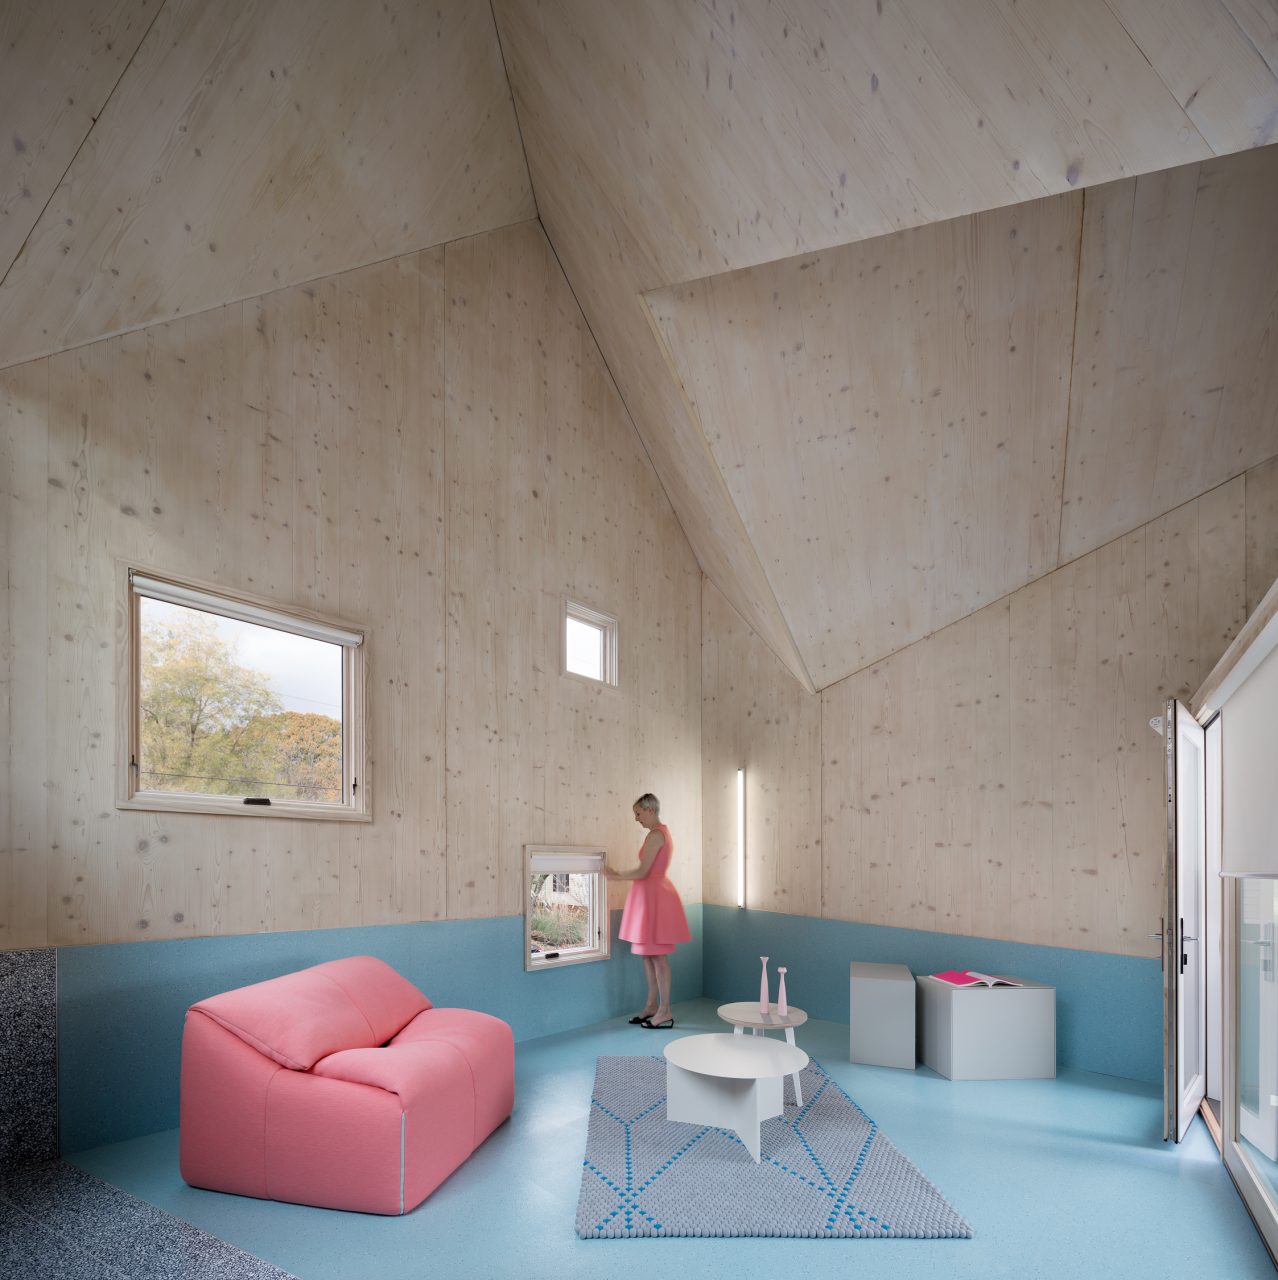 Image of Haus Gables living room with blue floor and pink furniture